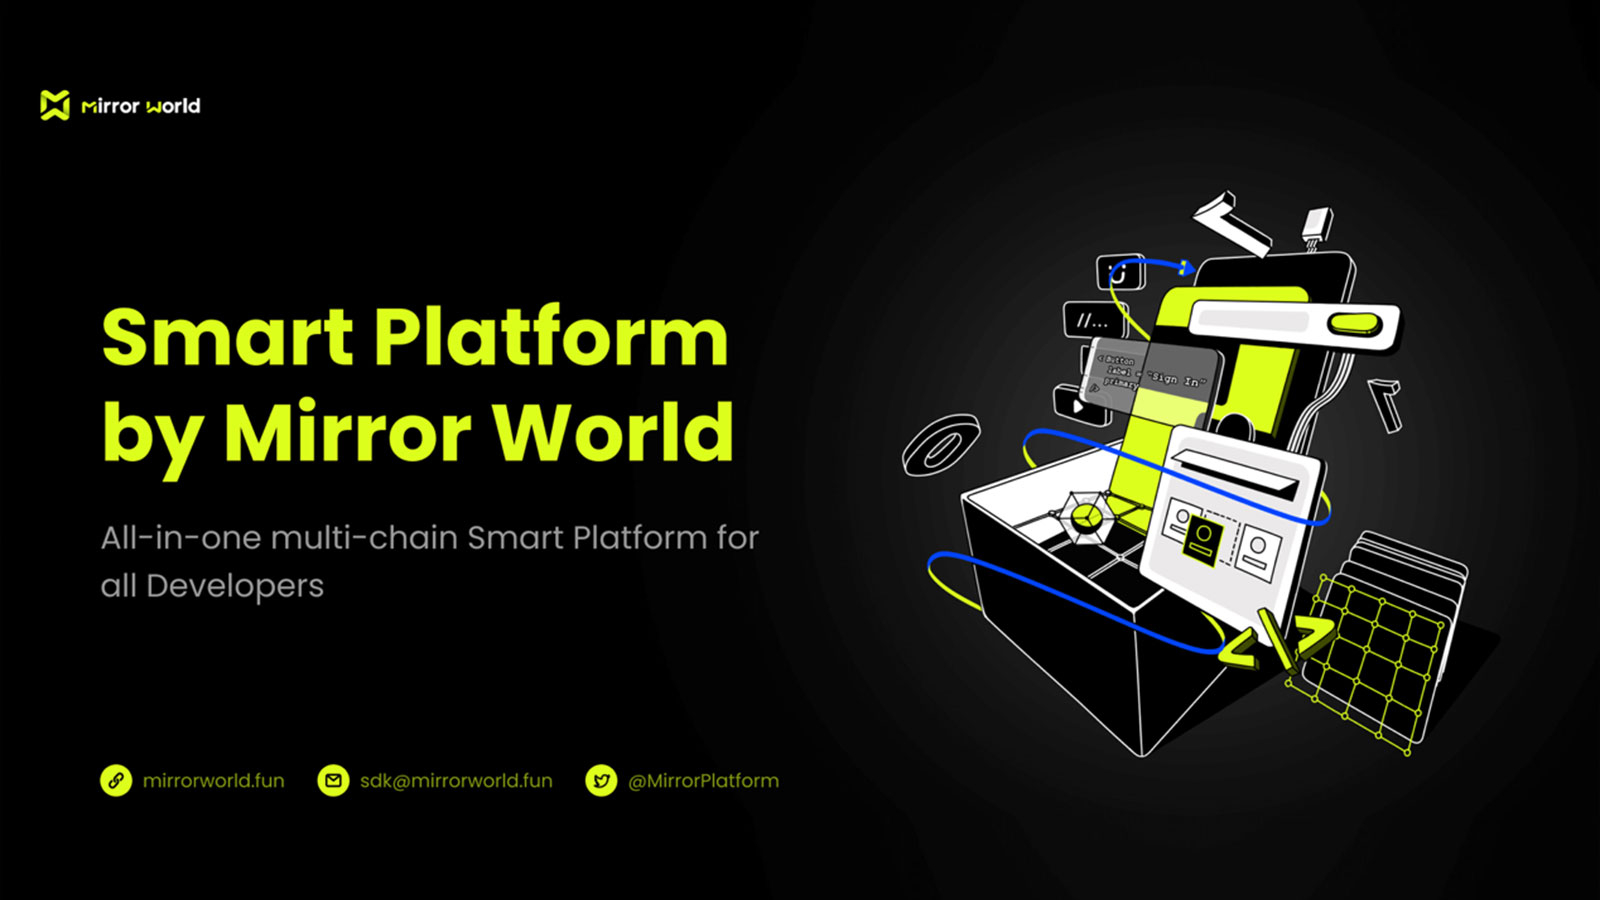 Mirror World Leads New Era of Blockchain Application and Gaming Development With the First All-In-One Multi-Chain Smart Platform